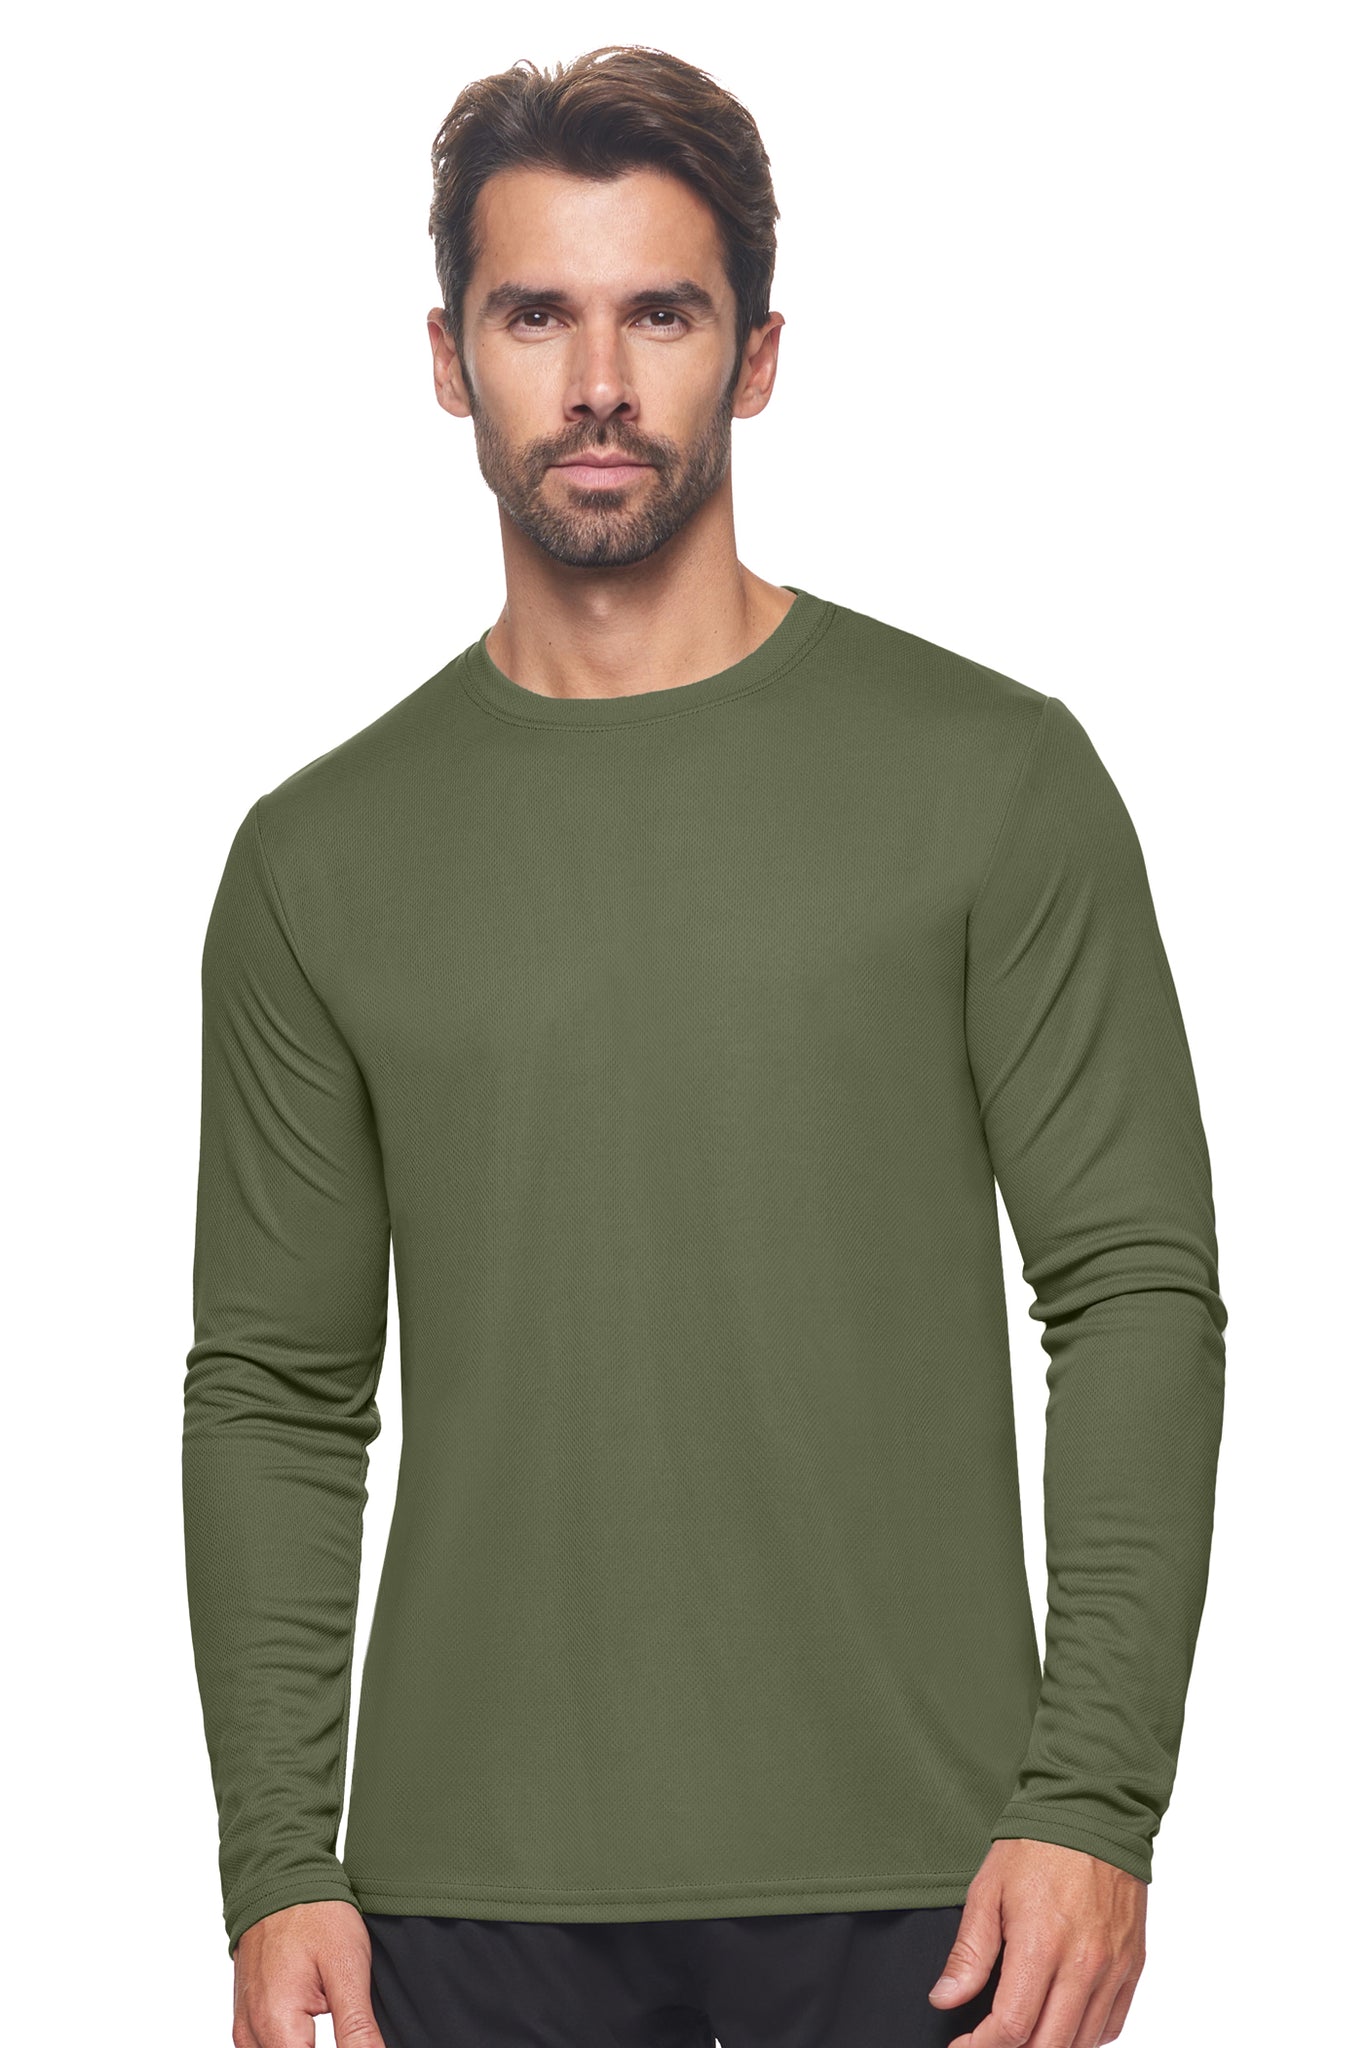 Expert Brand Wholesale Men's Oxymesh Performance Long Sleeve Tec Tee Made in USA AJ901D Military Green#military-green